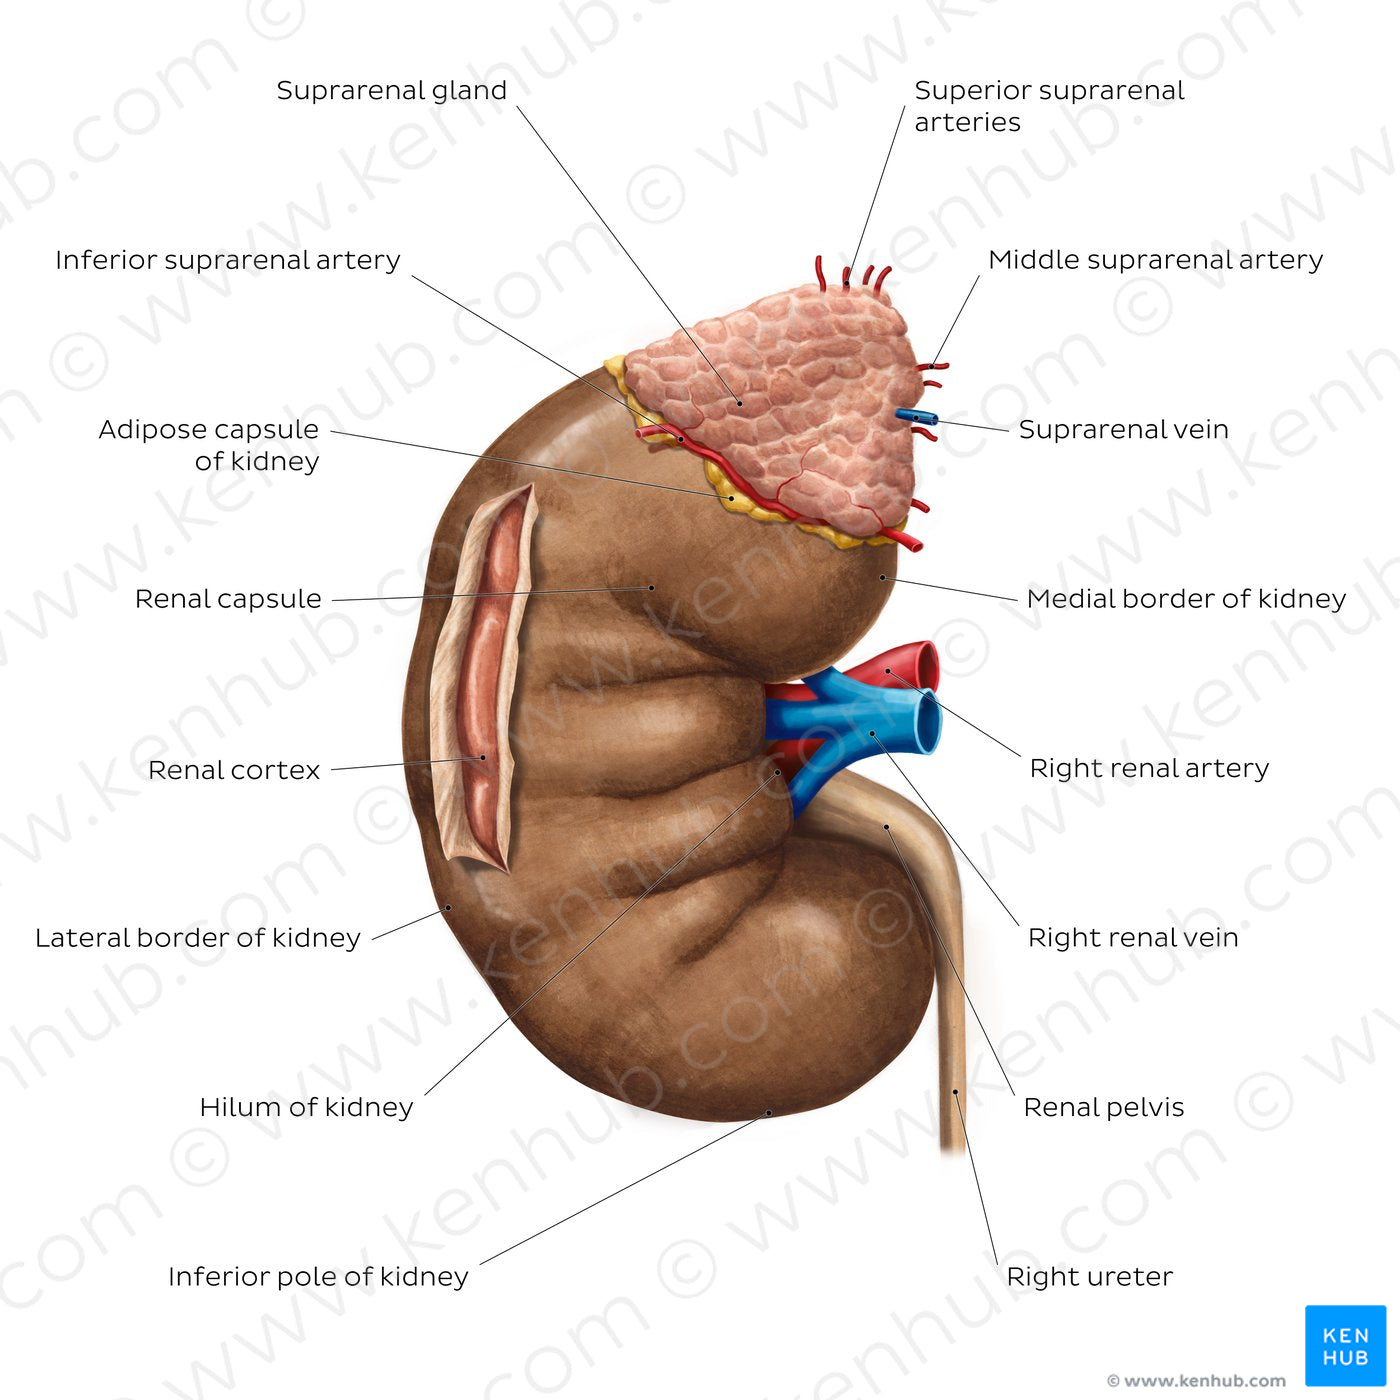 Overview of the kidney (English)